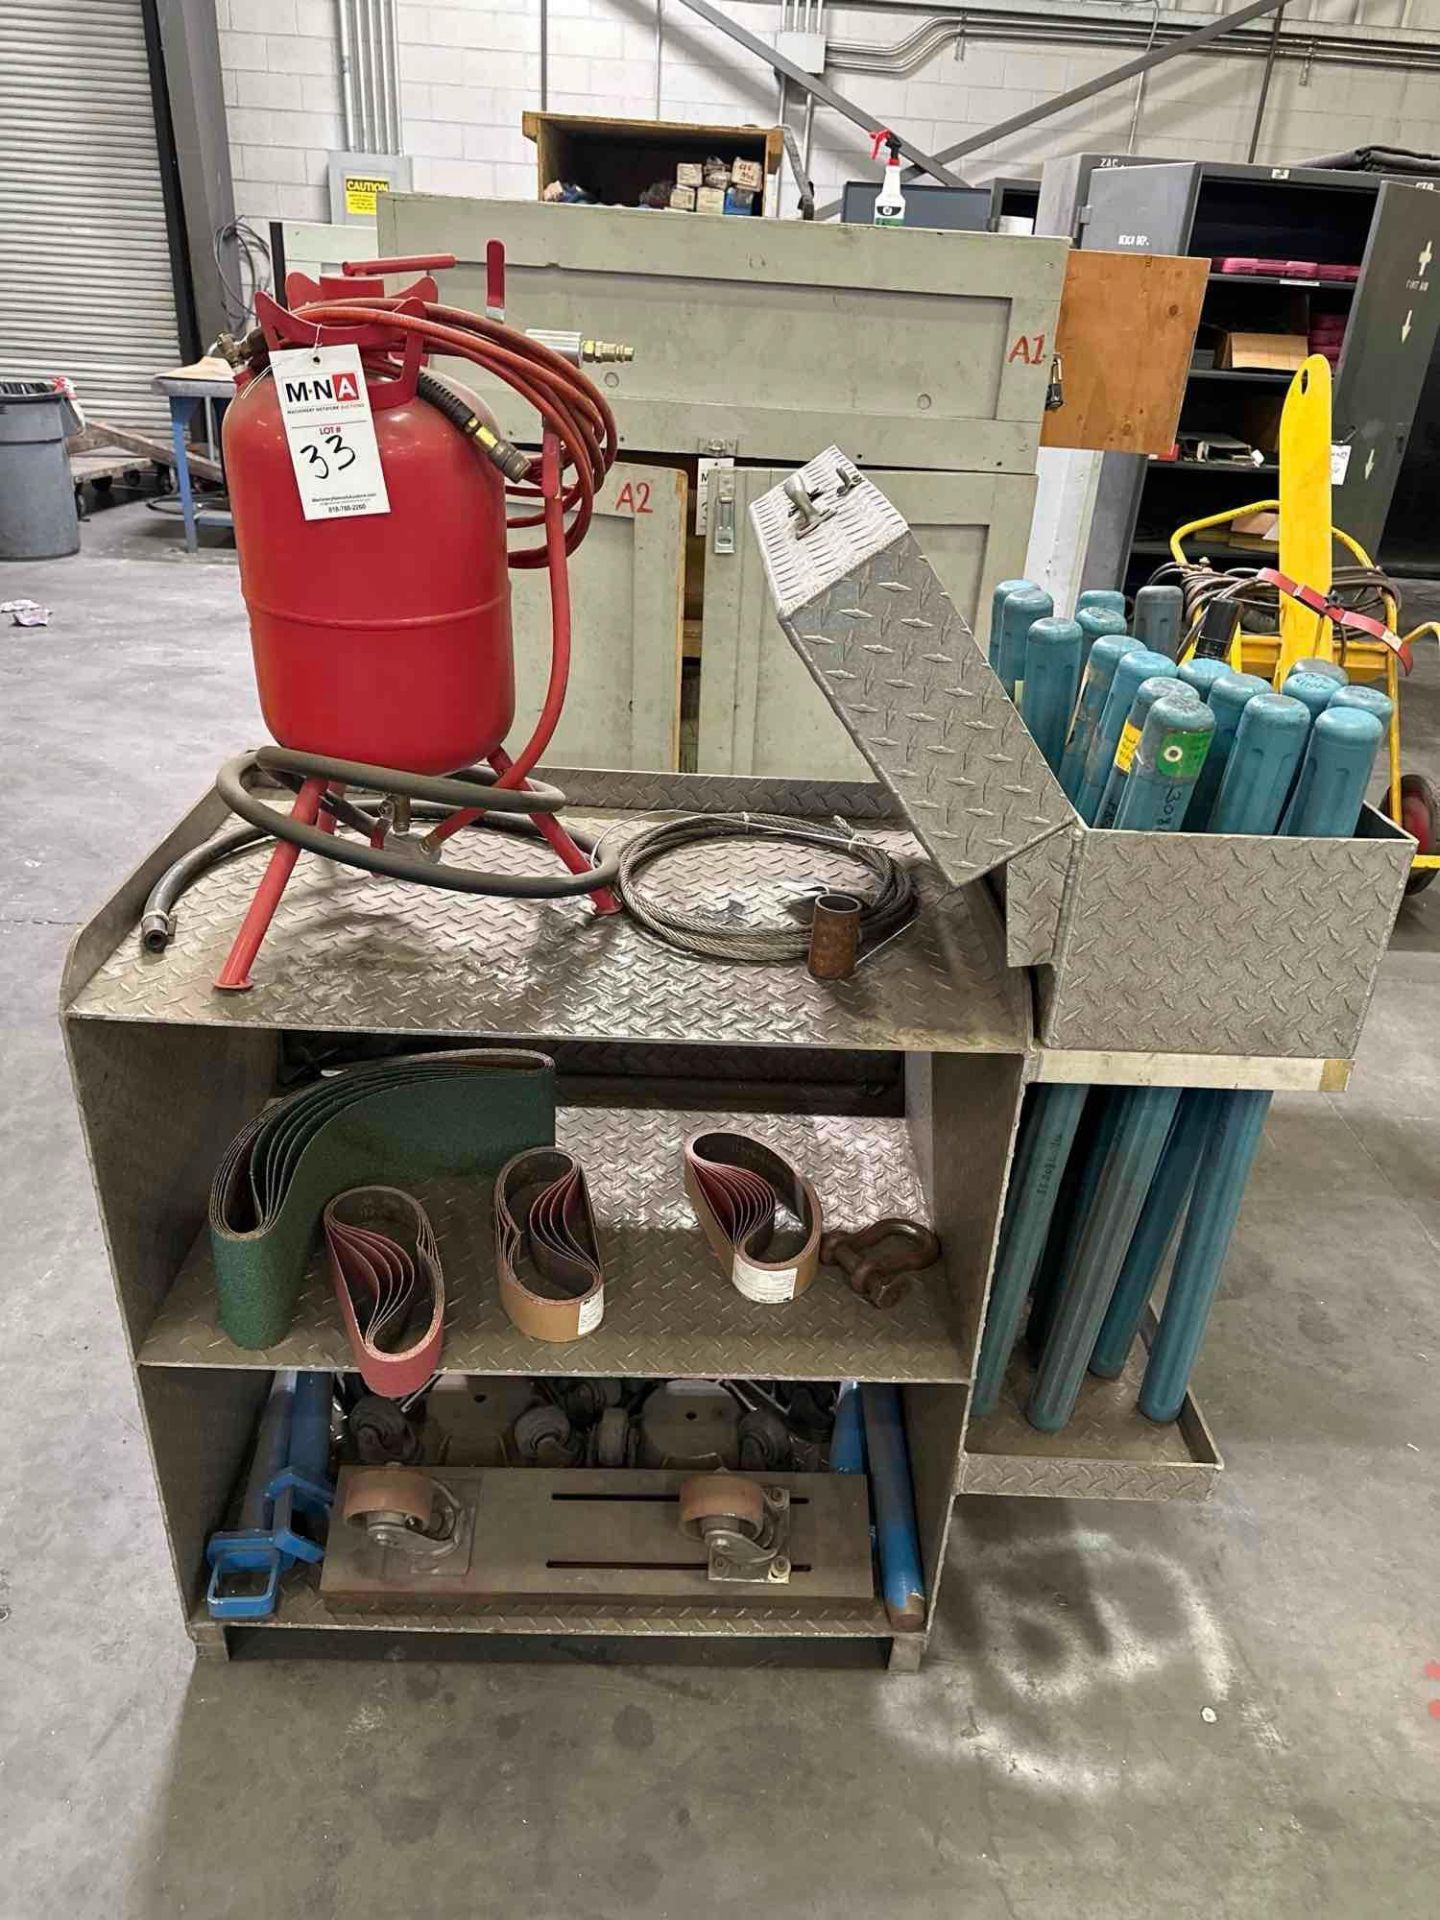 3 Tier Sheet Metal Shelving Unit w/ Central Pnuematic Tank, Welding Rod Containers